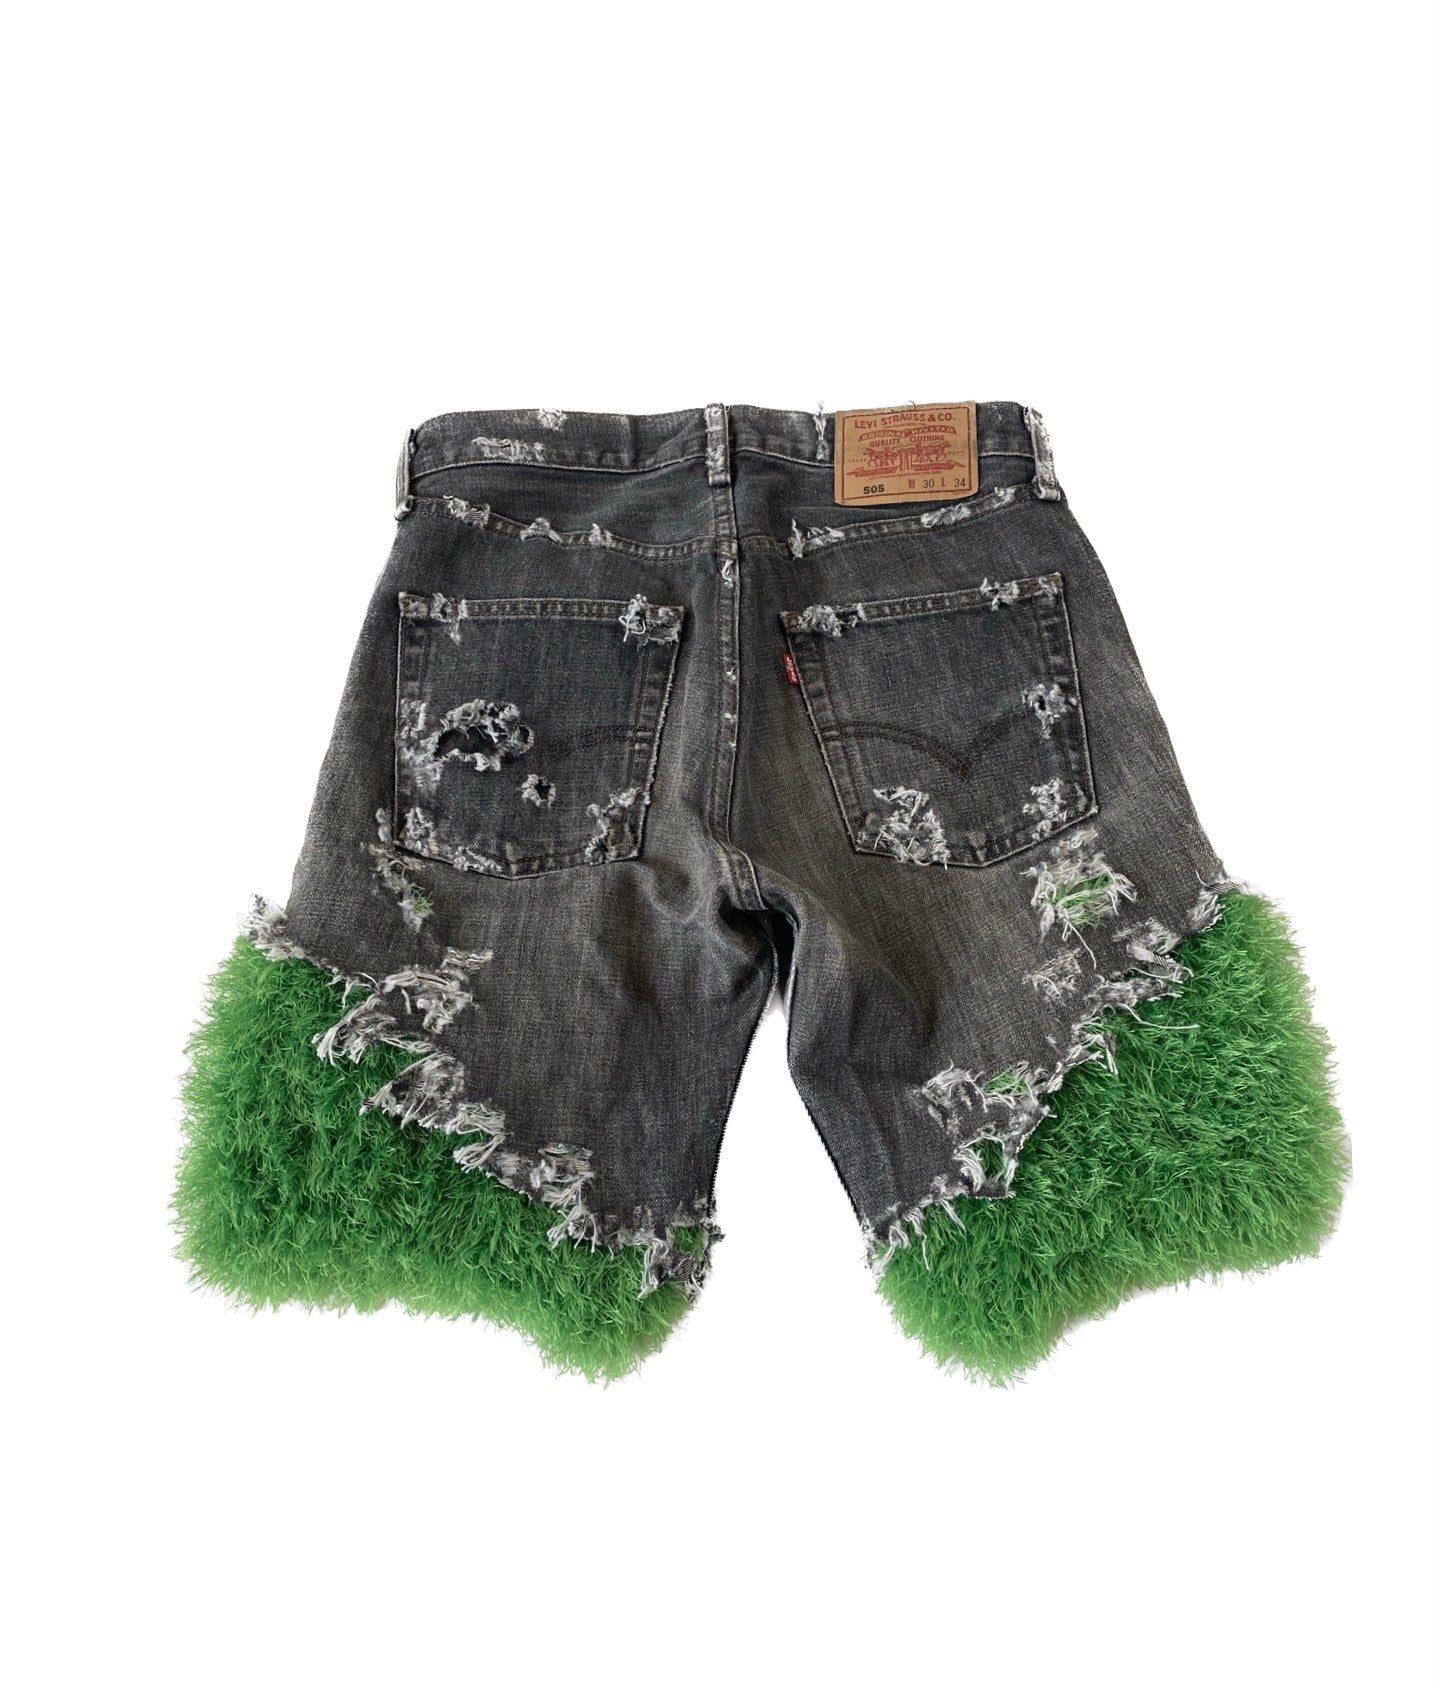 Distressed Levis with Spring Fur 【05】